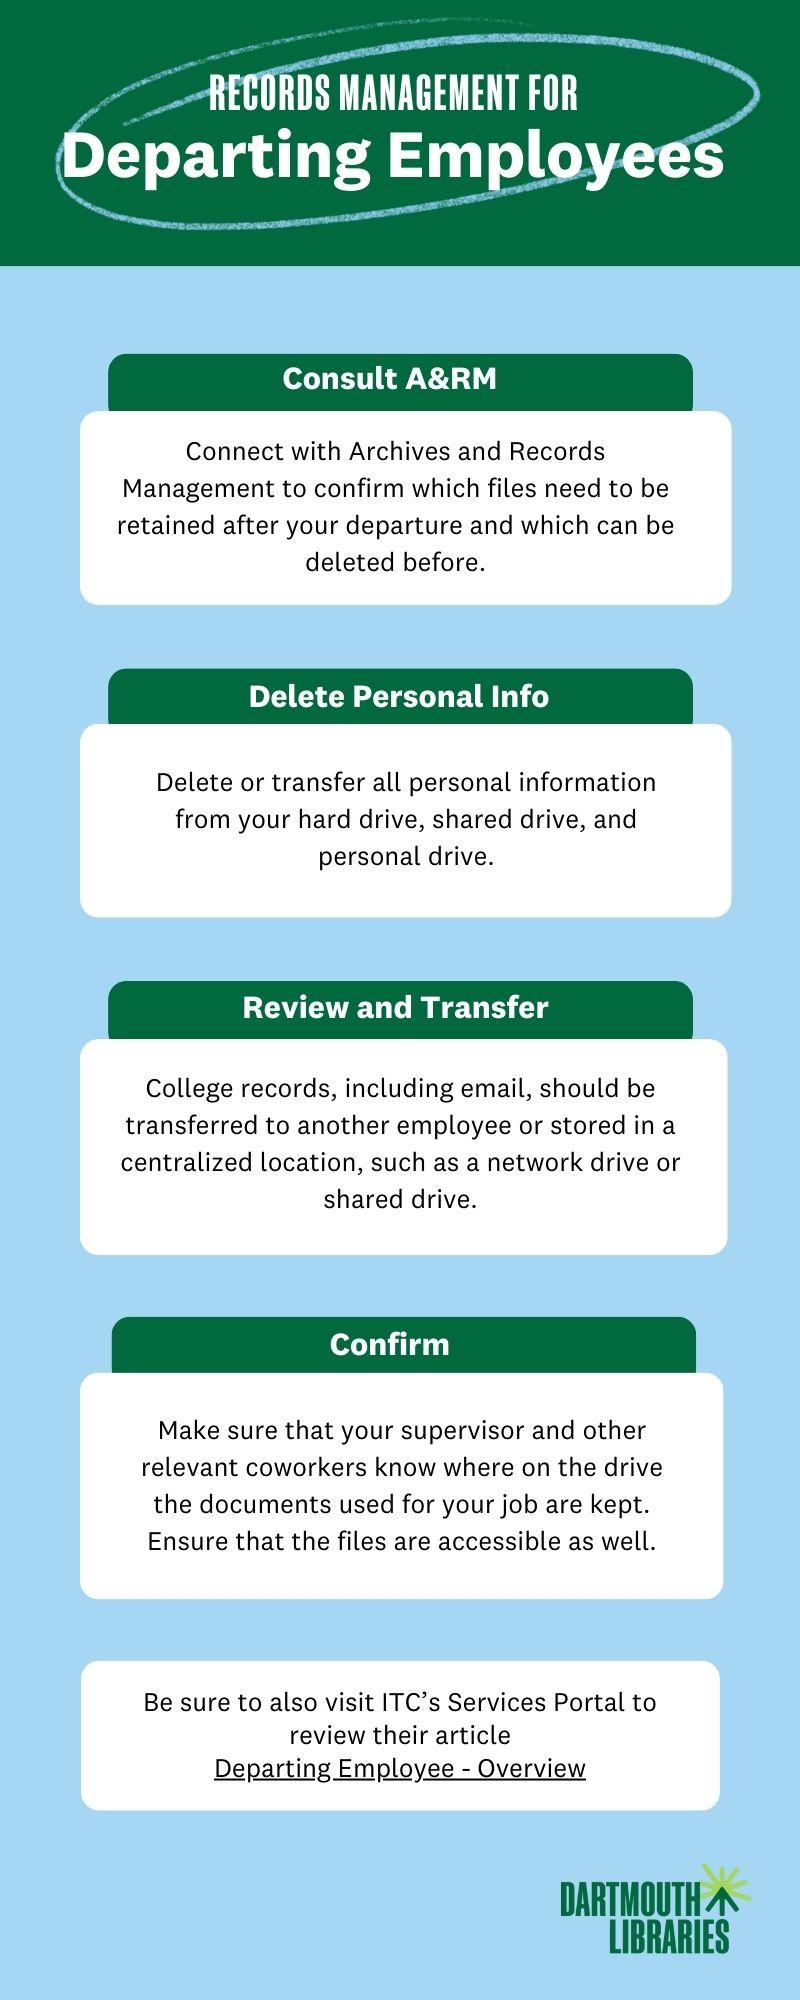 five blocks of text describing the records management steps employees should take when leaving the college